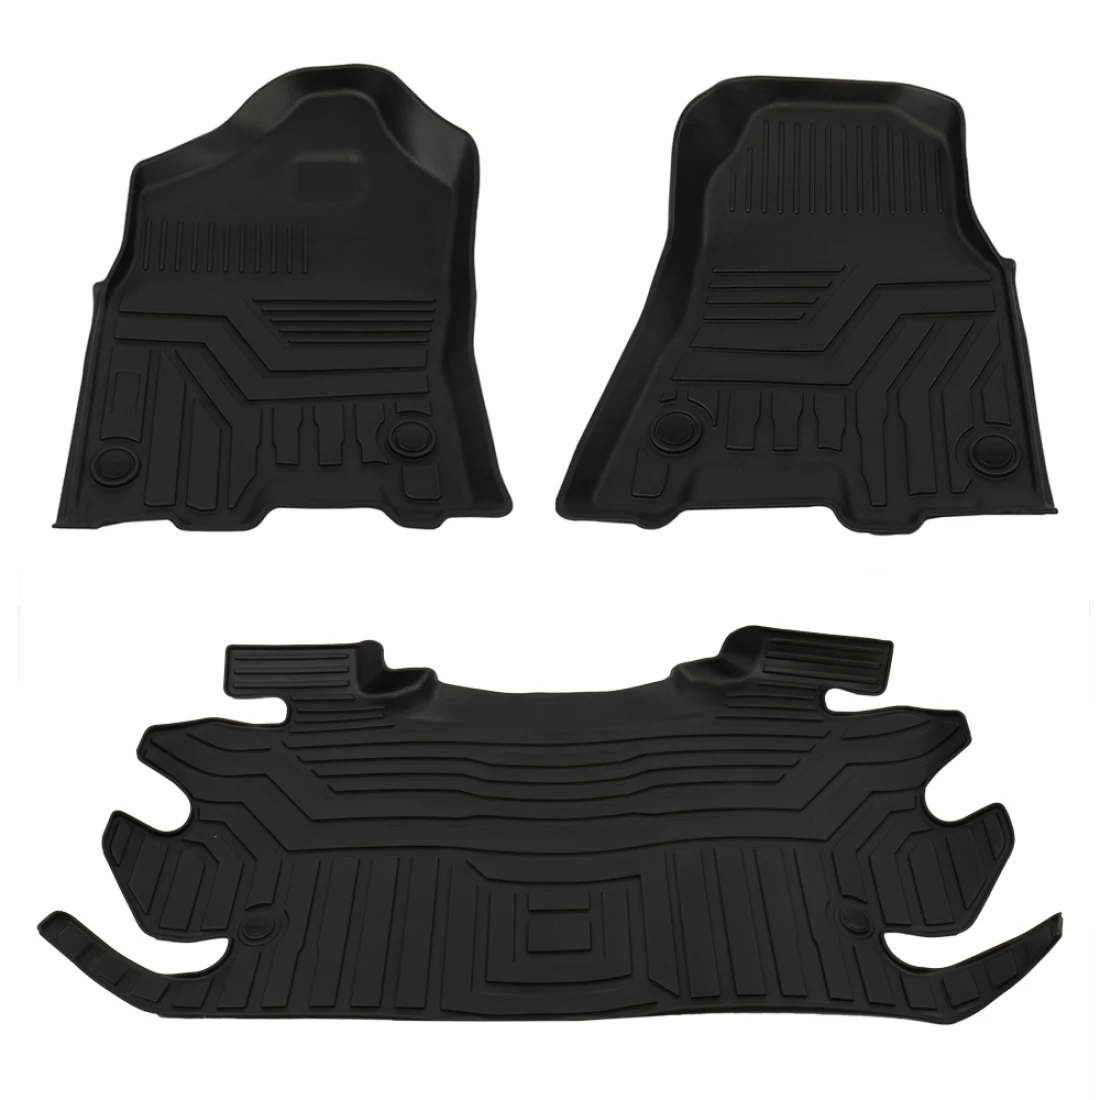 

Limit Discounts Crew Cab 1st and 2nd Row Floor Mats for Dodge Ram 1500 2500 3500 2012-2019